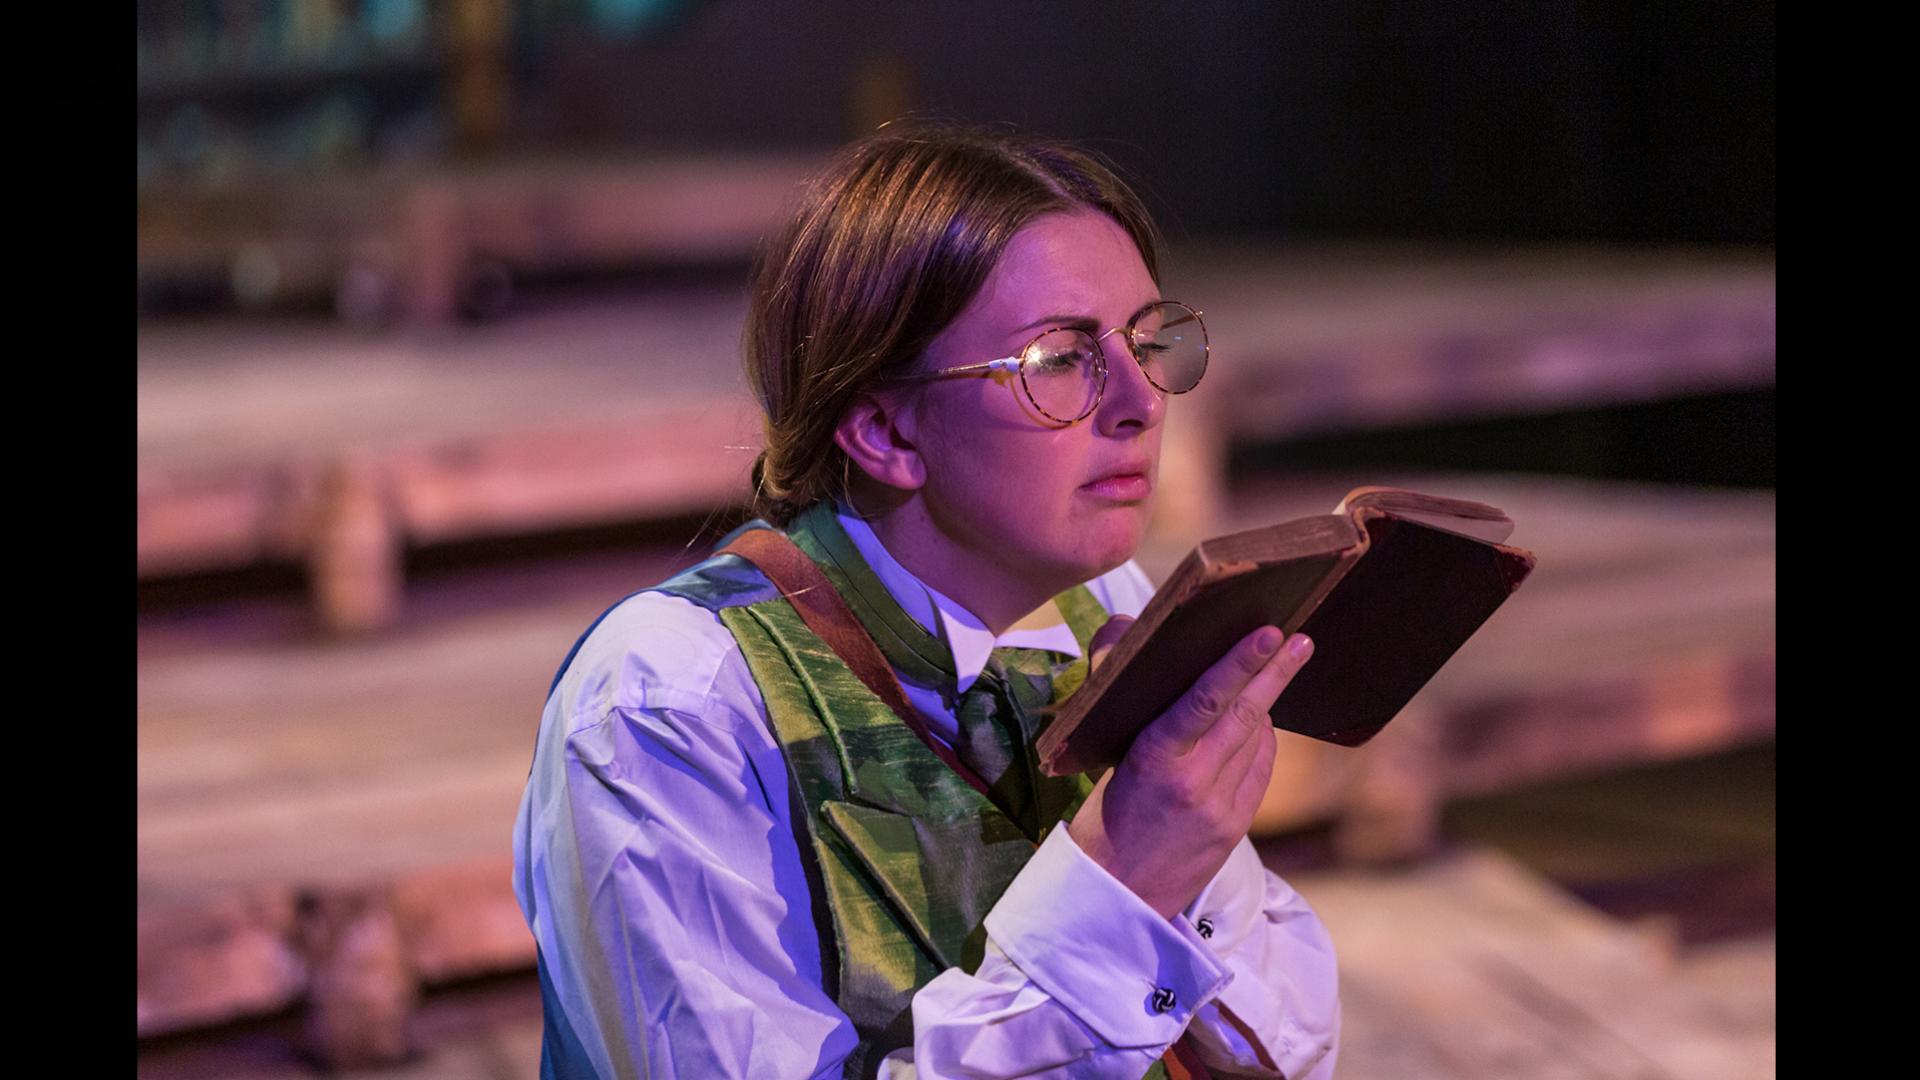 Actor playing Bates, dressed in a green waistcoat, white shirt, wearing wire rimmed glasses and reading an old book.